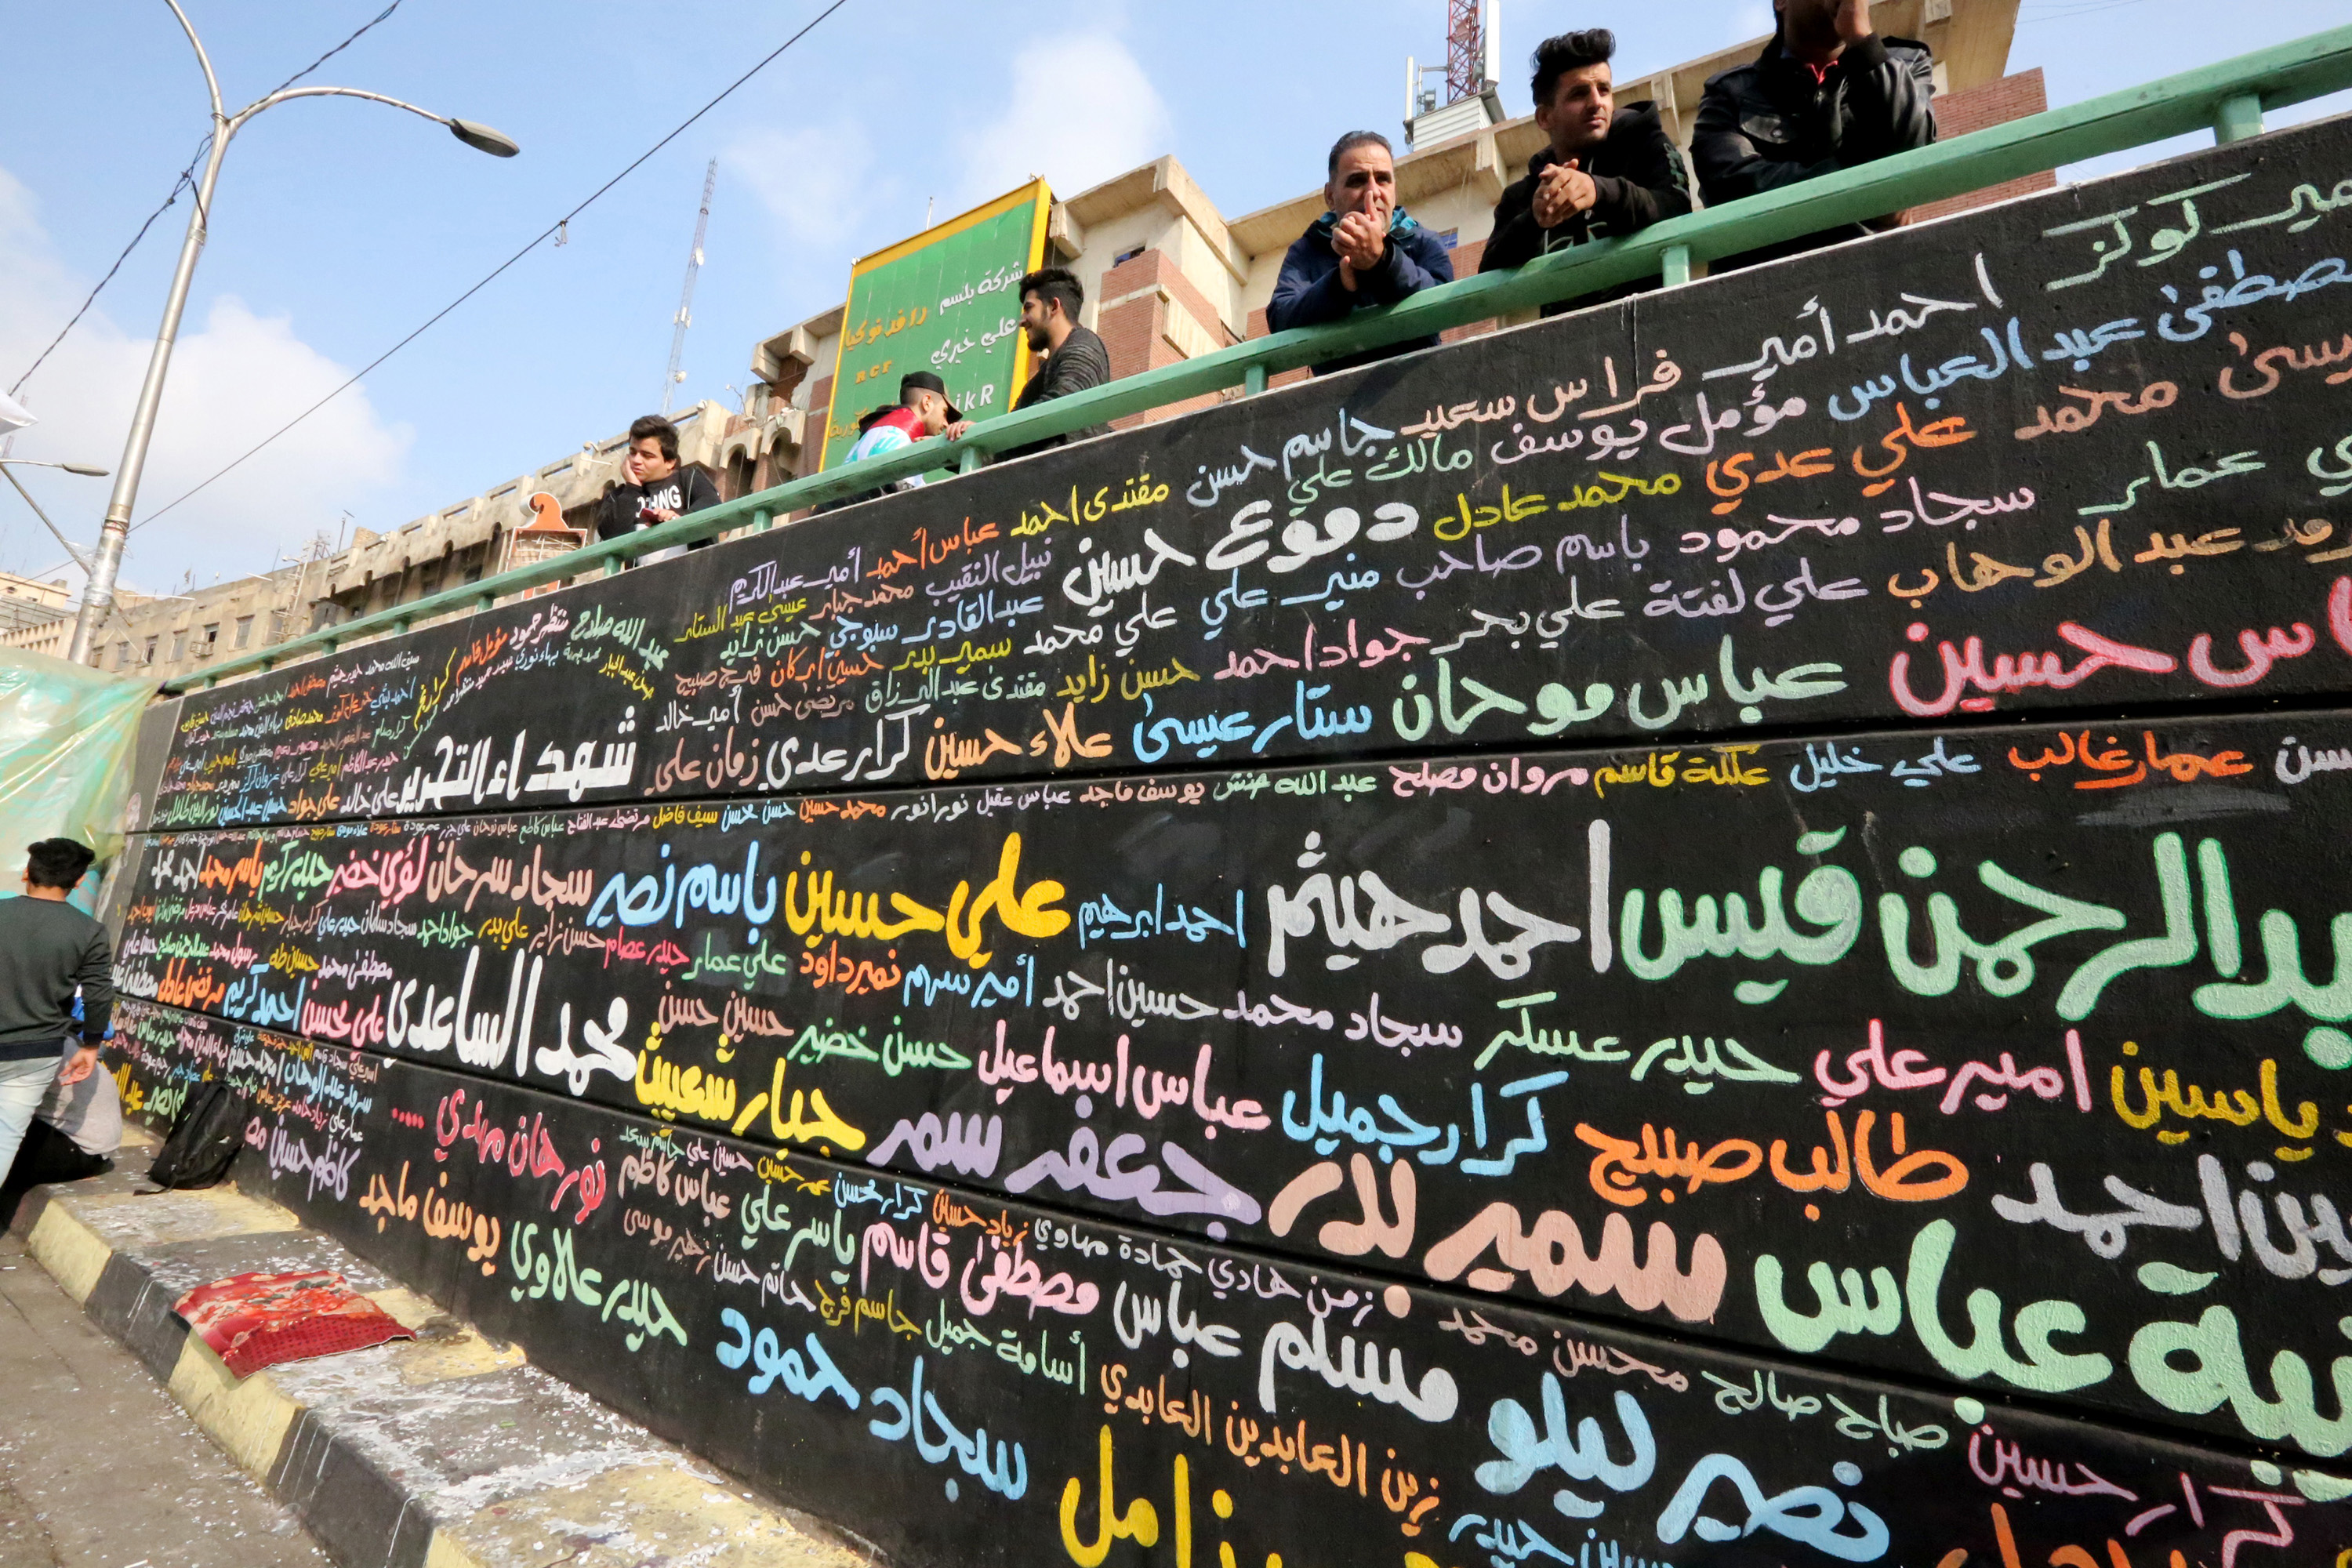 A memorial mural bearing names of demonstrators killed during ongoing anti-government protests is seen in Tahrir square in the capital Baghdad on 8 December (AFP)